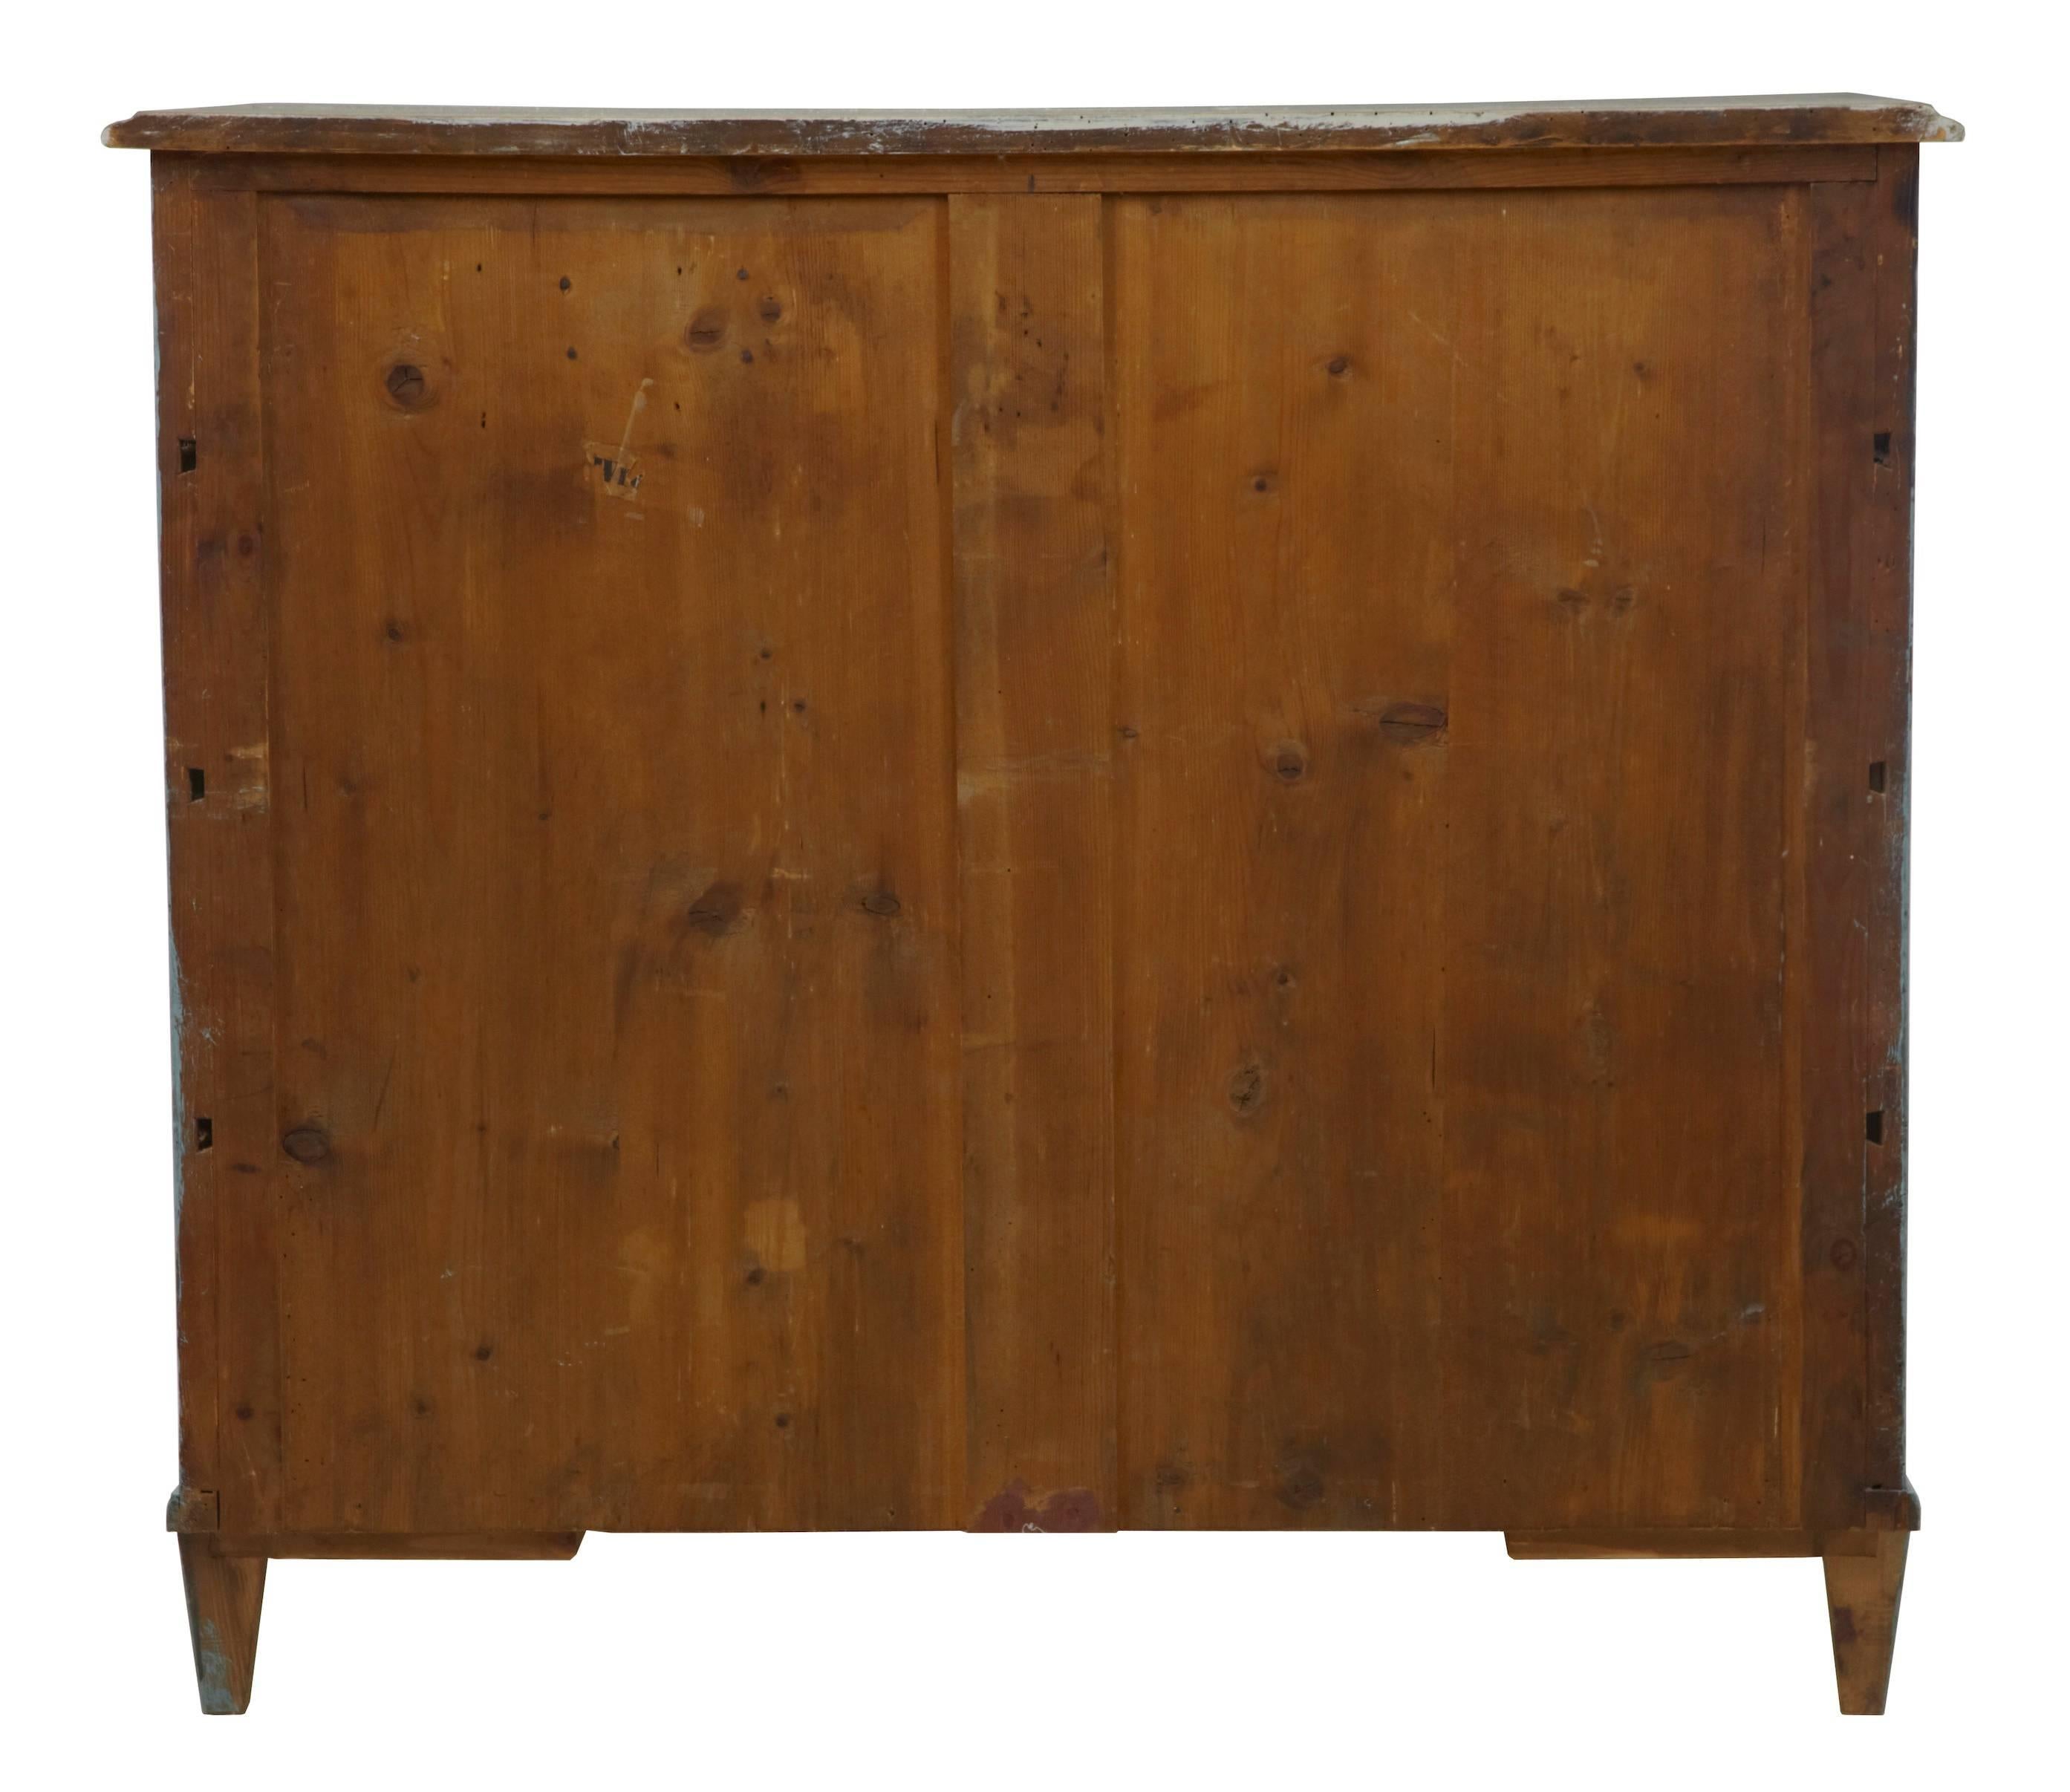 European 19th Century Painted Swedish Chest of Drawers Commode